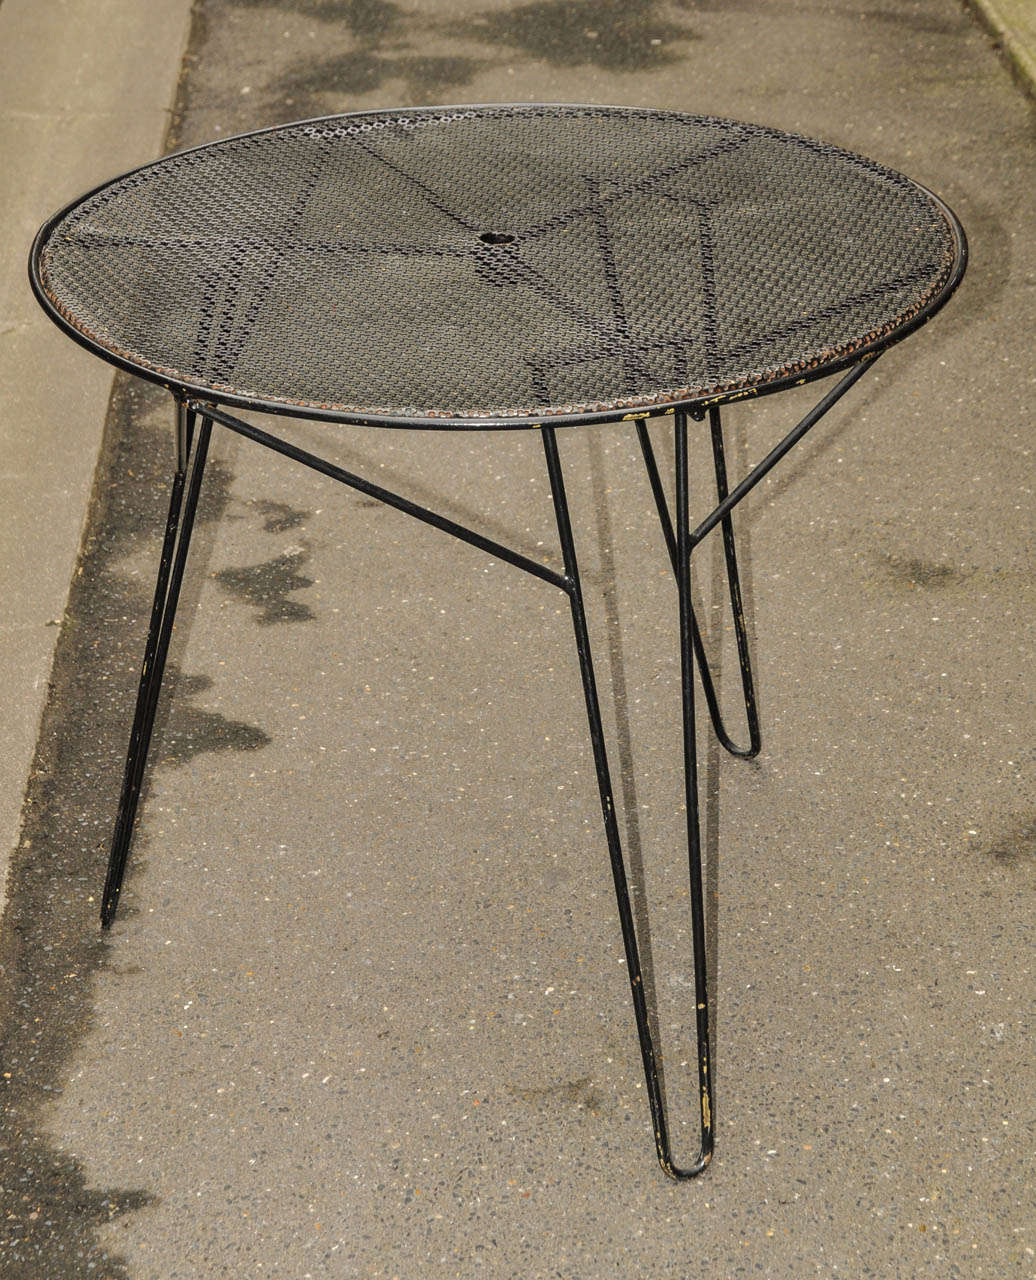 1980's garden table. Original legs and non original top. Black lacquered metal. Lost paint. Normal wear consistent with age and use.